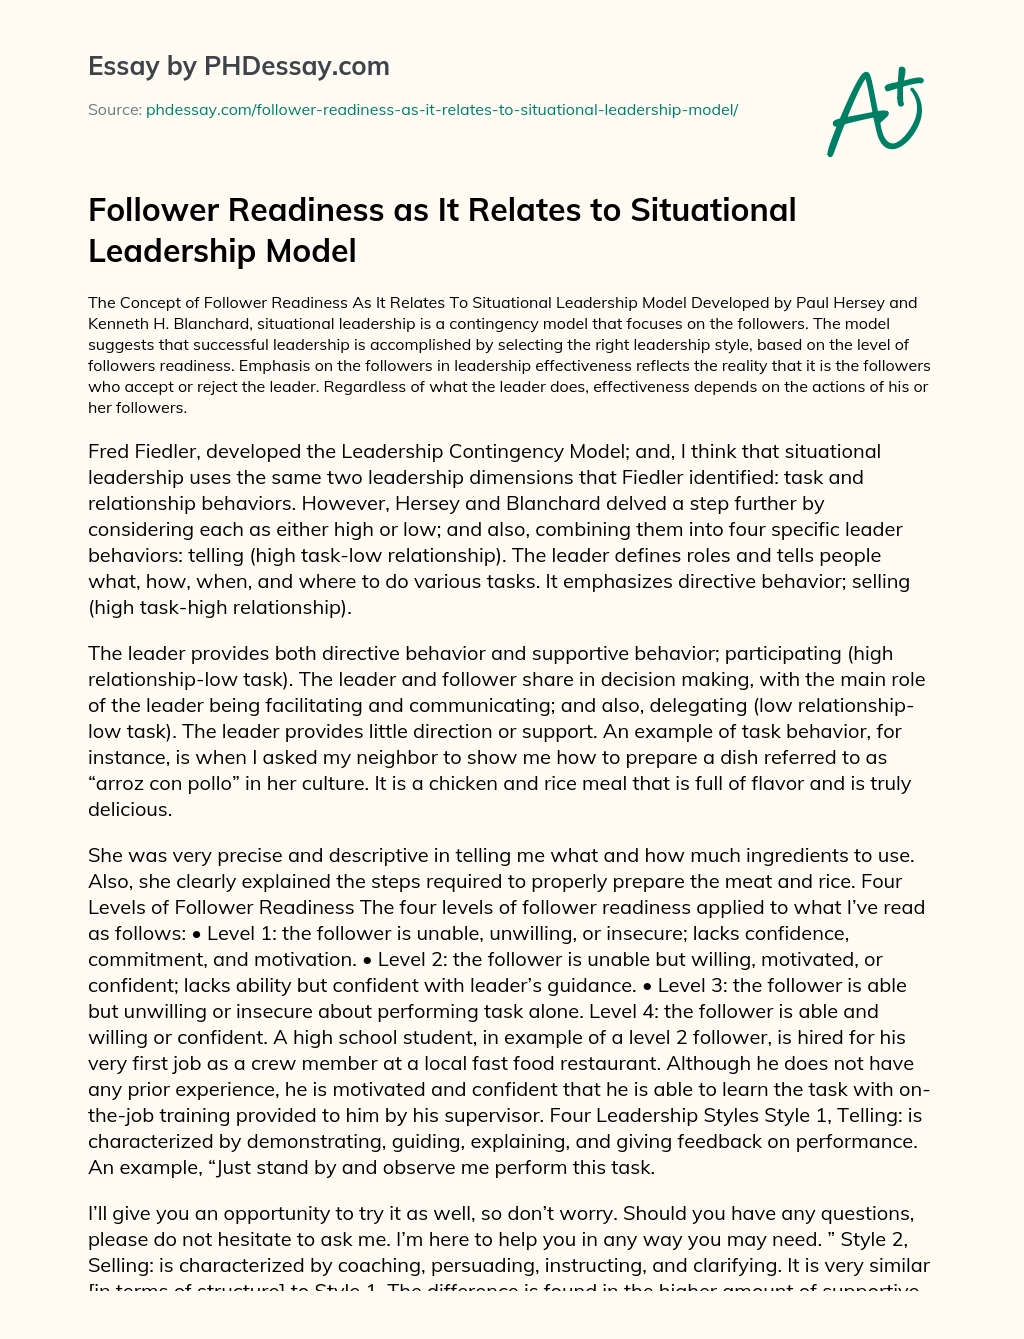 Follower Readiness as It Relates to Situational Leadership Model essay